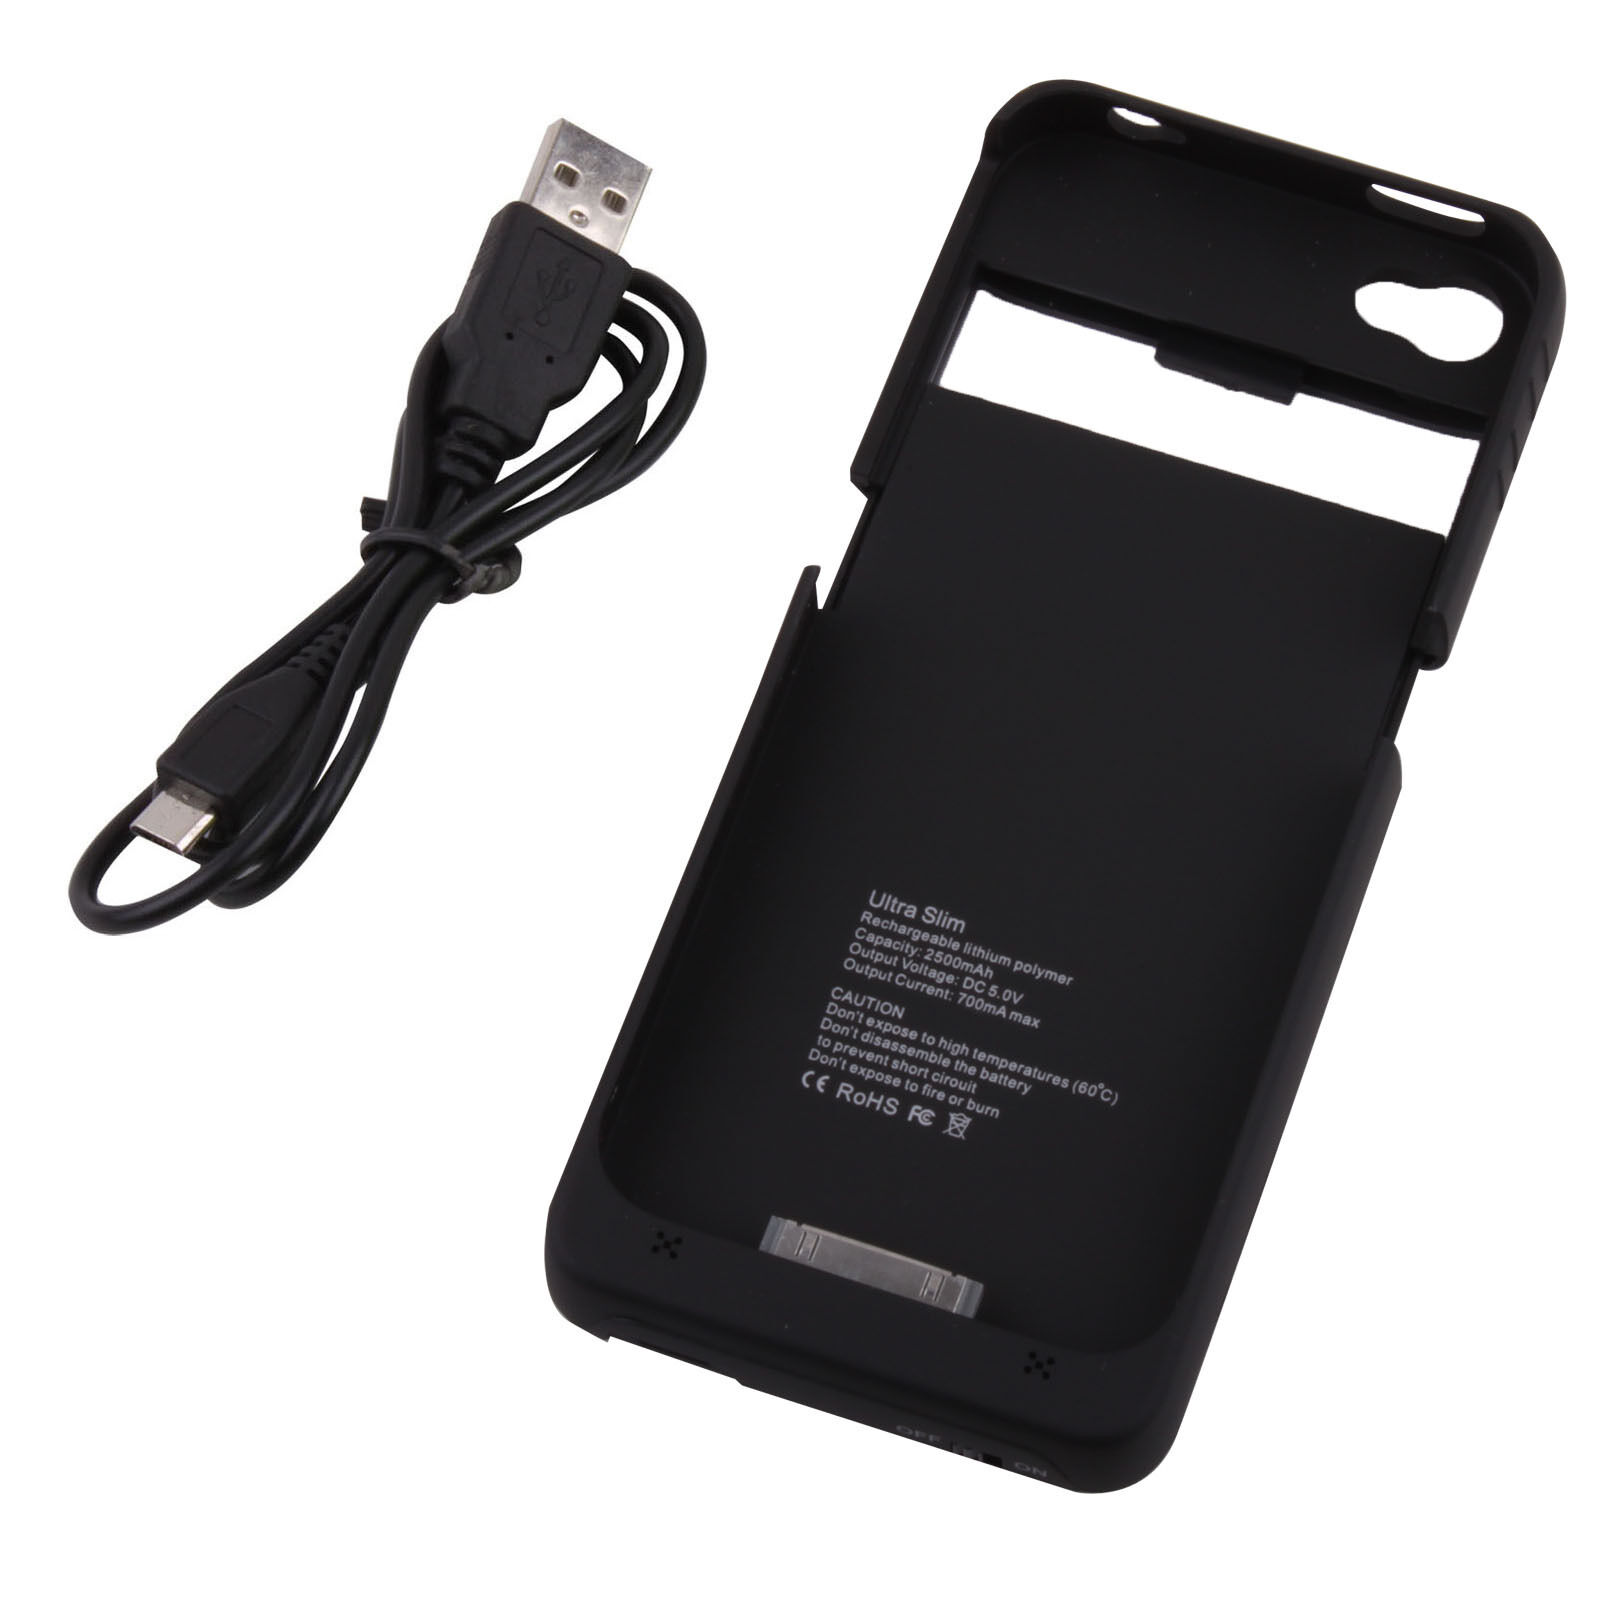 New Black 2500mAh External Backup Battery Charger Case For Iphone 4 4G 4S